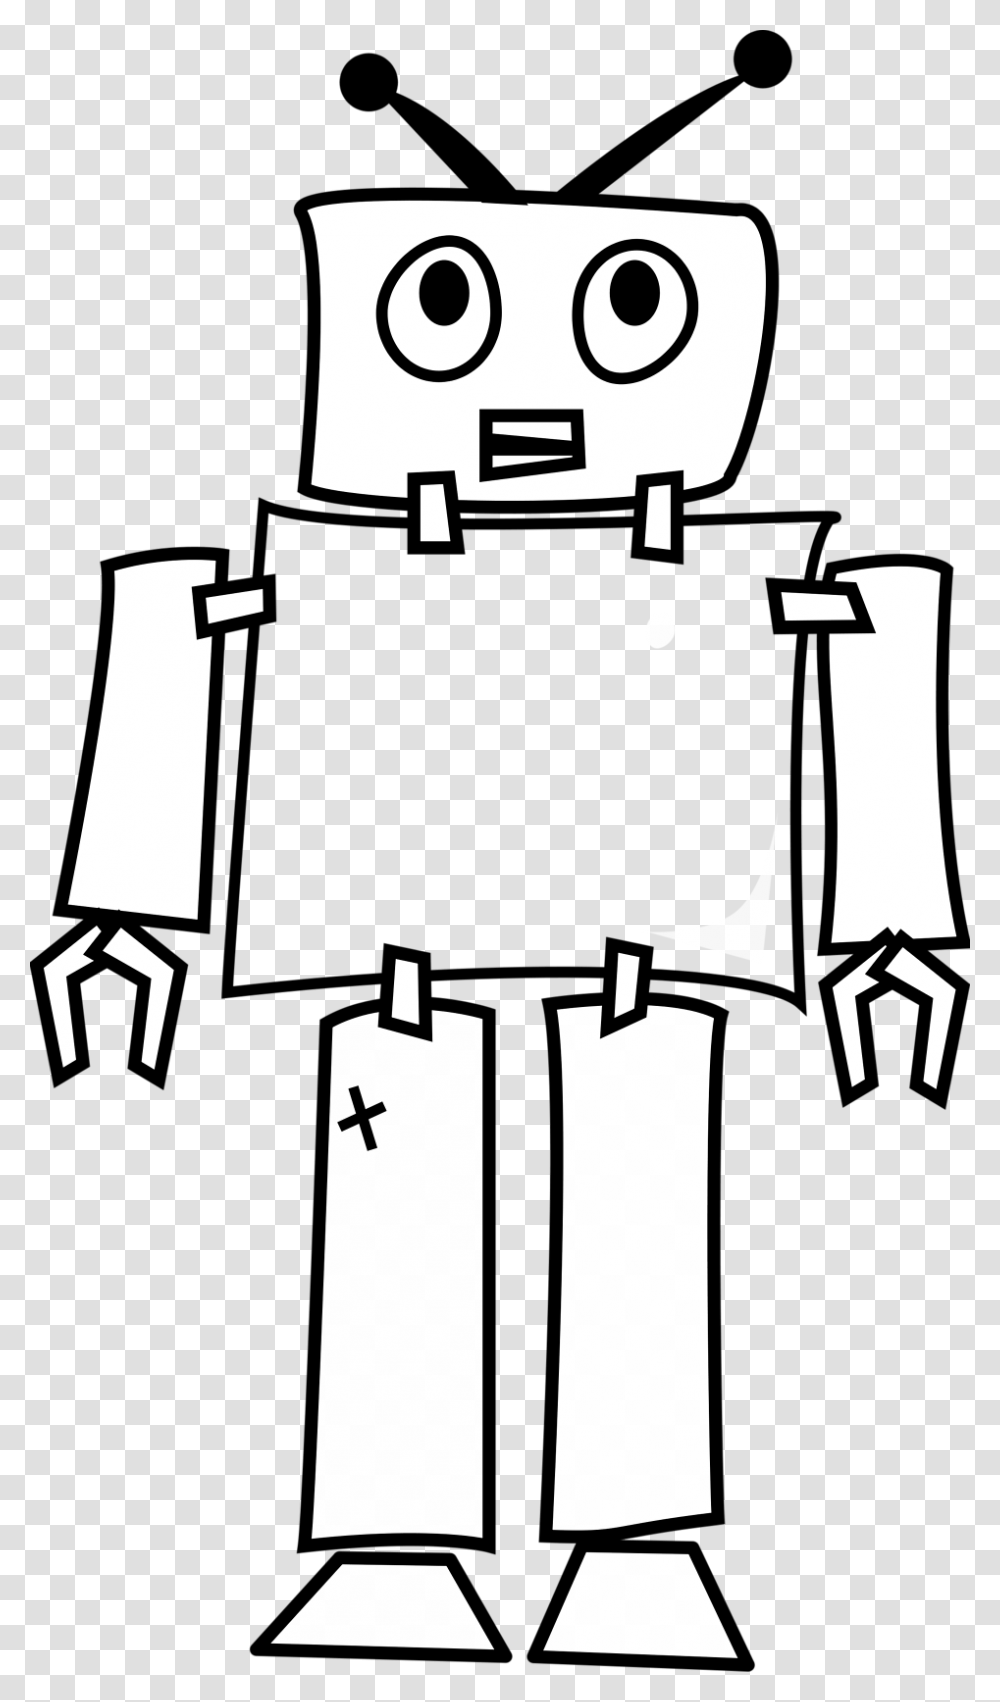 Drawn Robot Black And White, Stencil, Cross Transparent Png